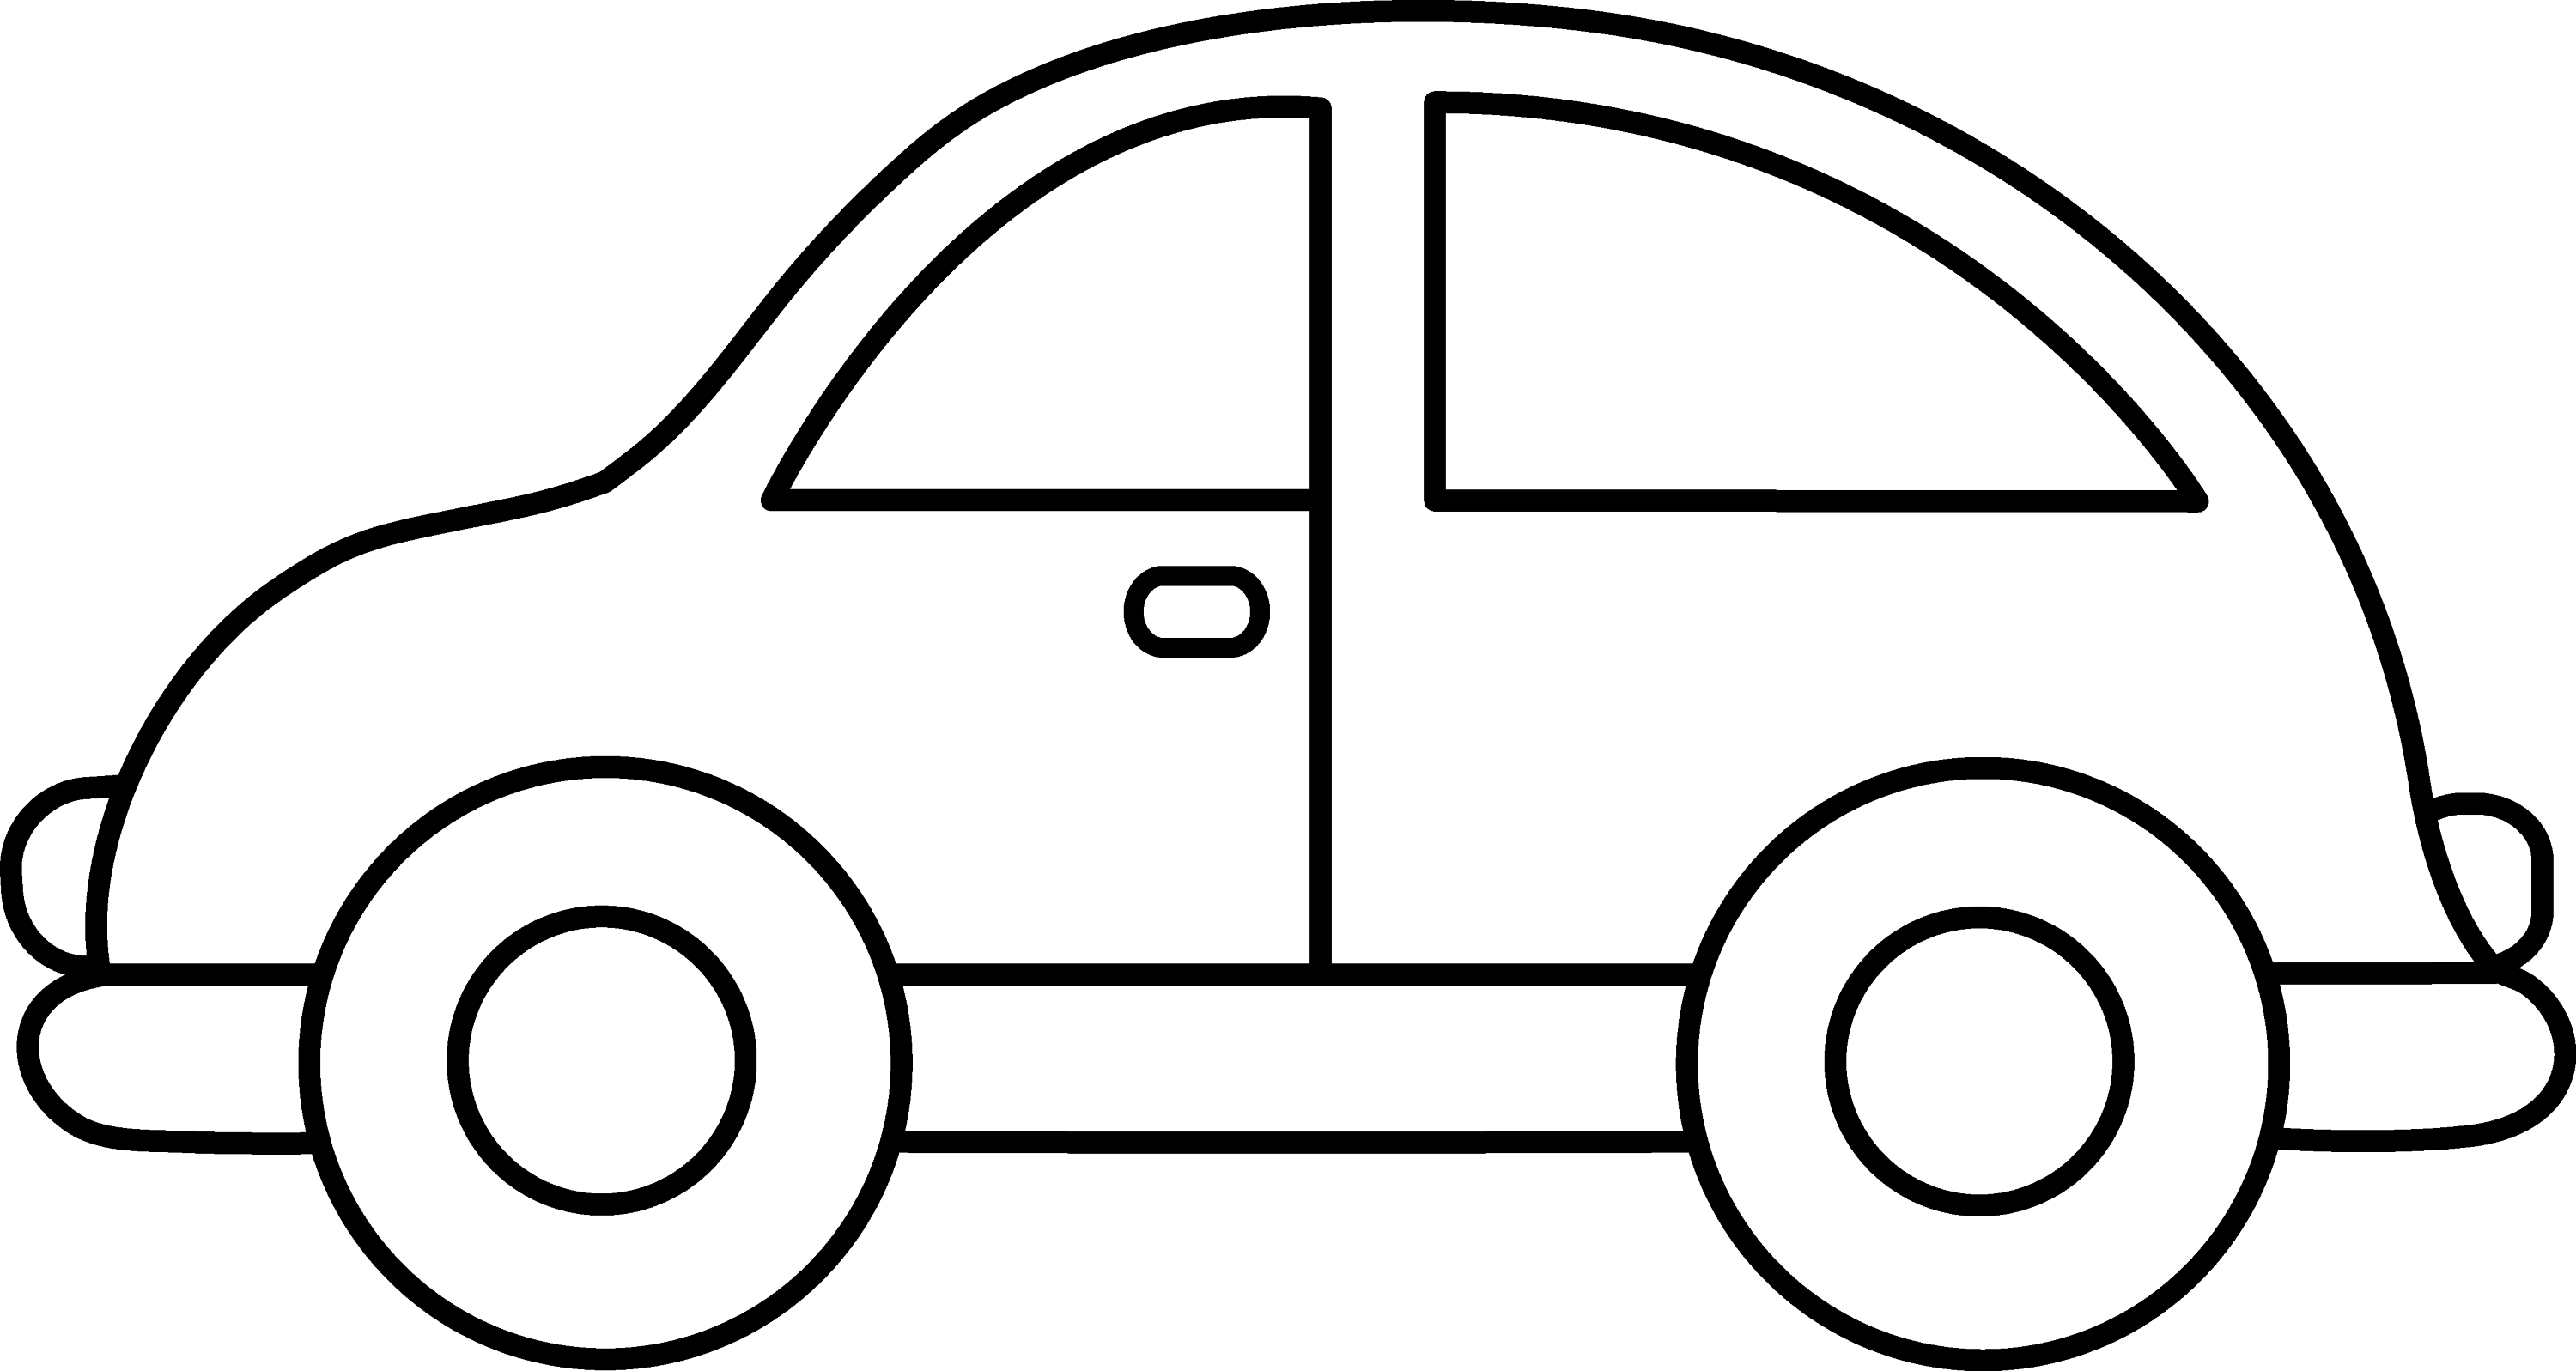 Cute Toy Car Coloring Page - Free Clip Art